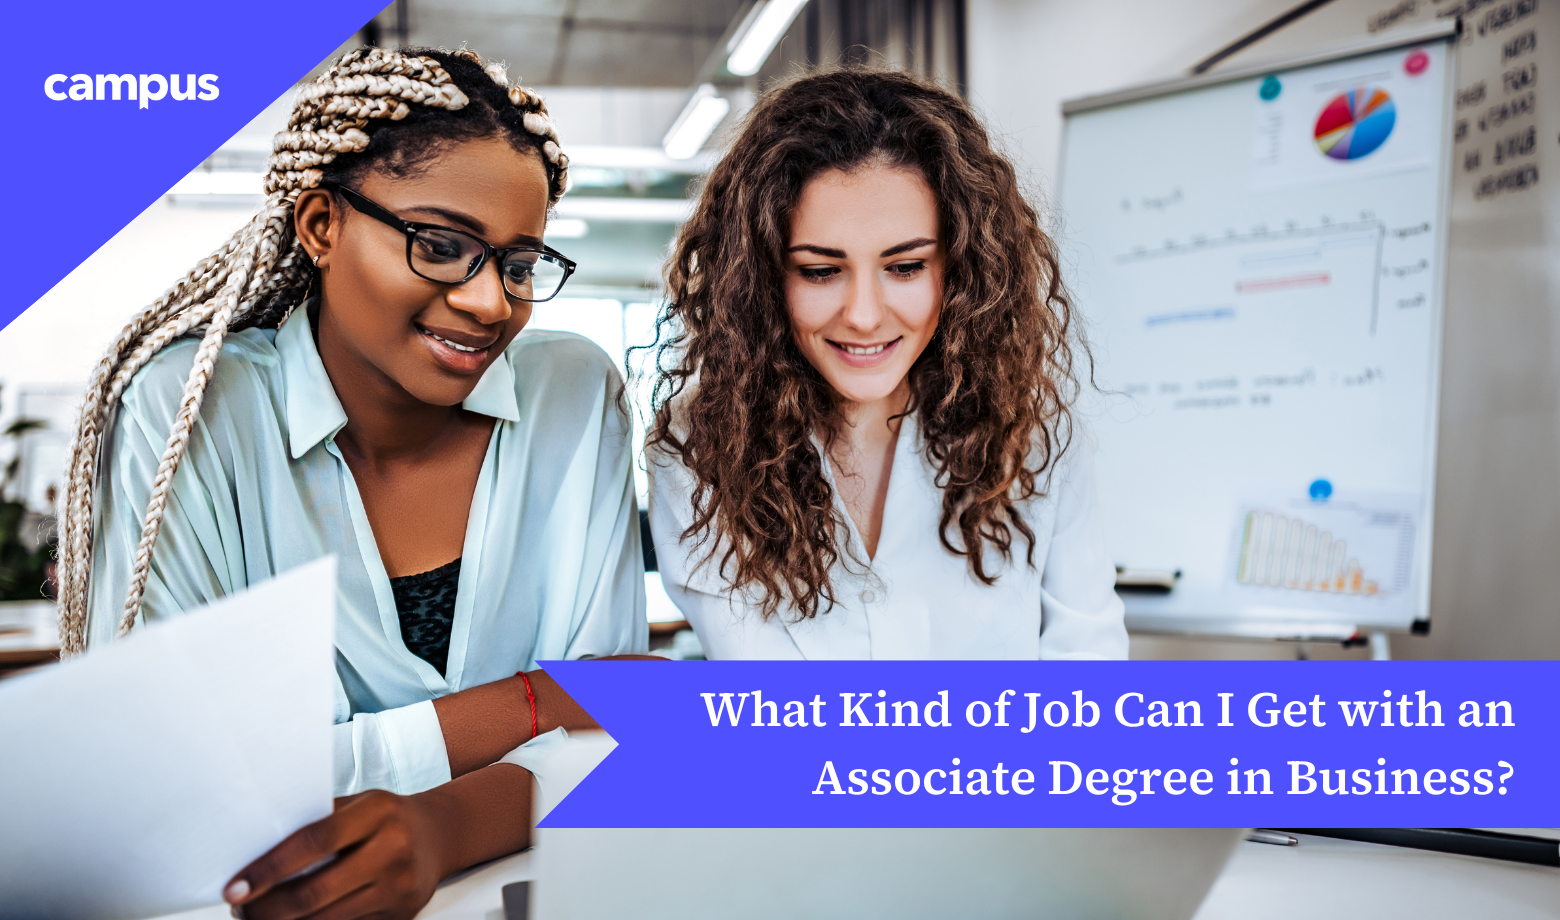 What Kind of Job Can I Get with an Associate Degree in Business?